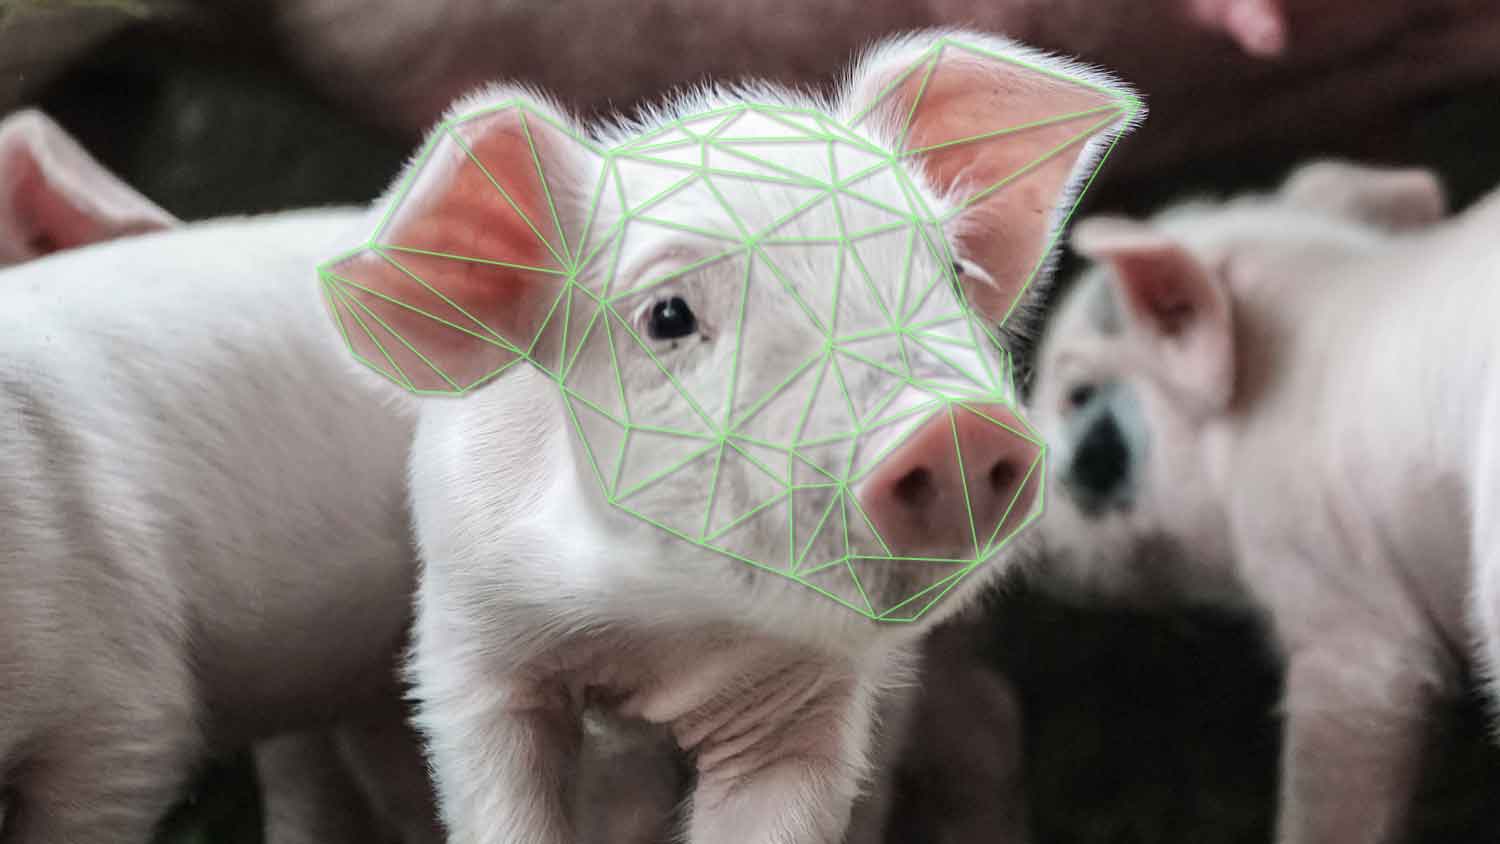 Facial Recognition Technology Developed to Improve Pigs' Lives